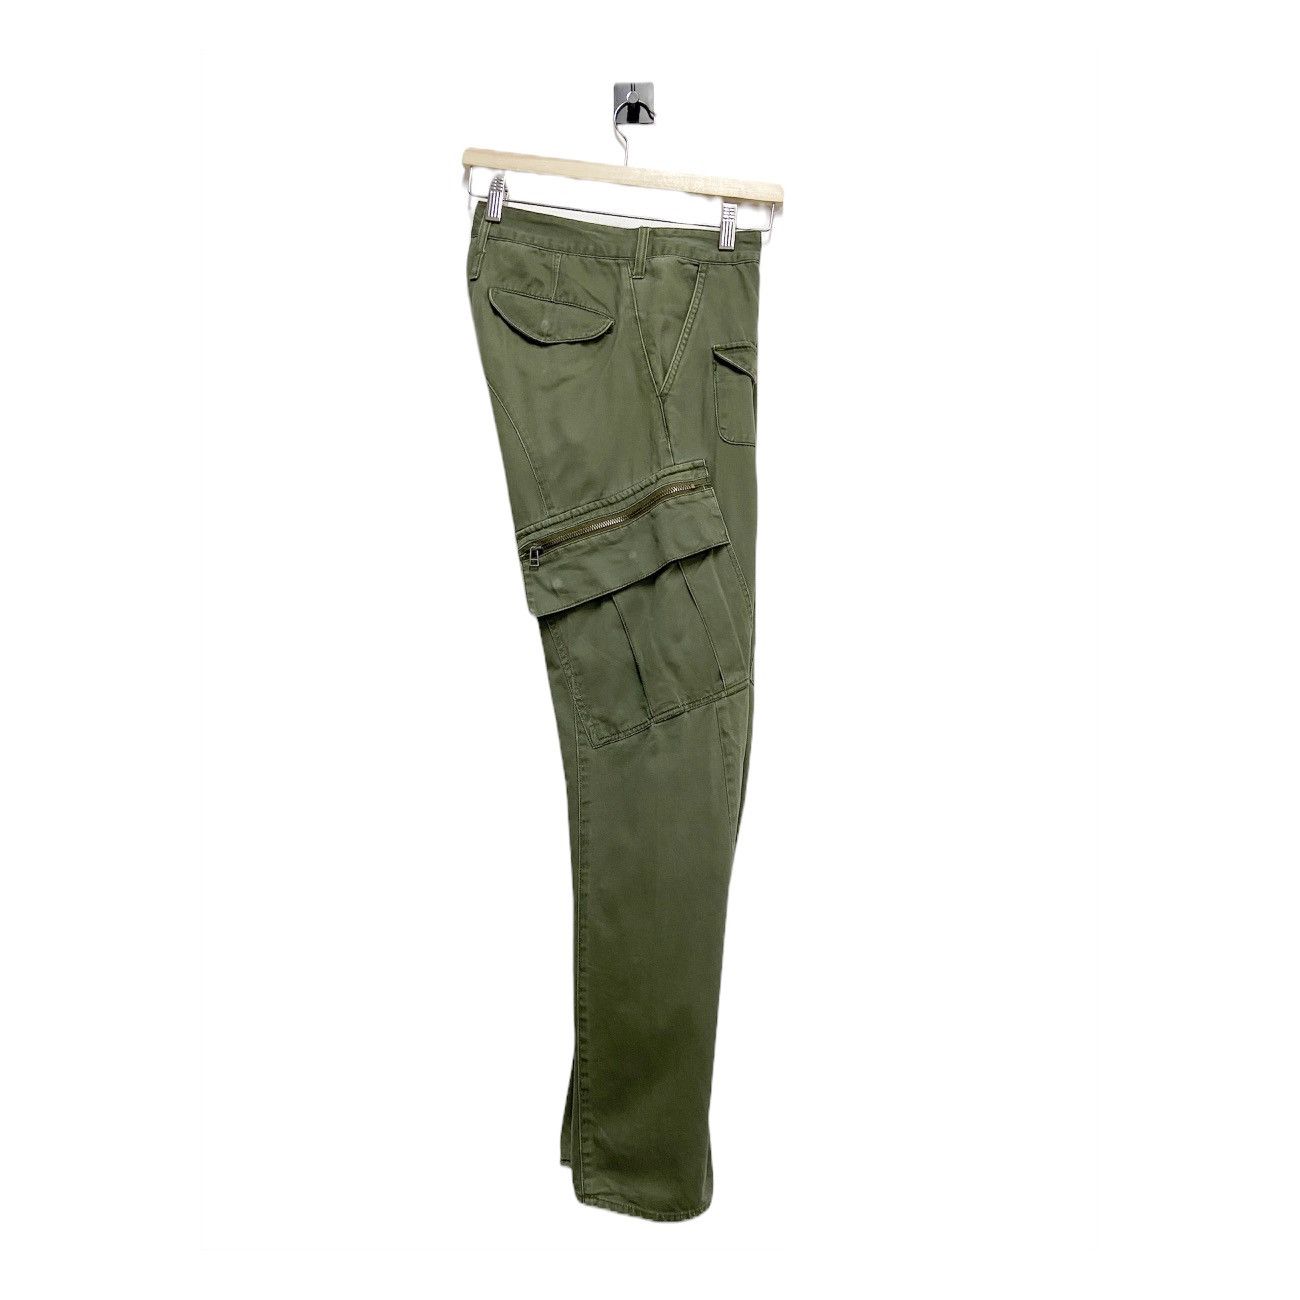 Vintage - Dominate Handcrafted Jeans Cargo Pant - 3